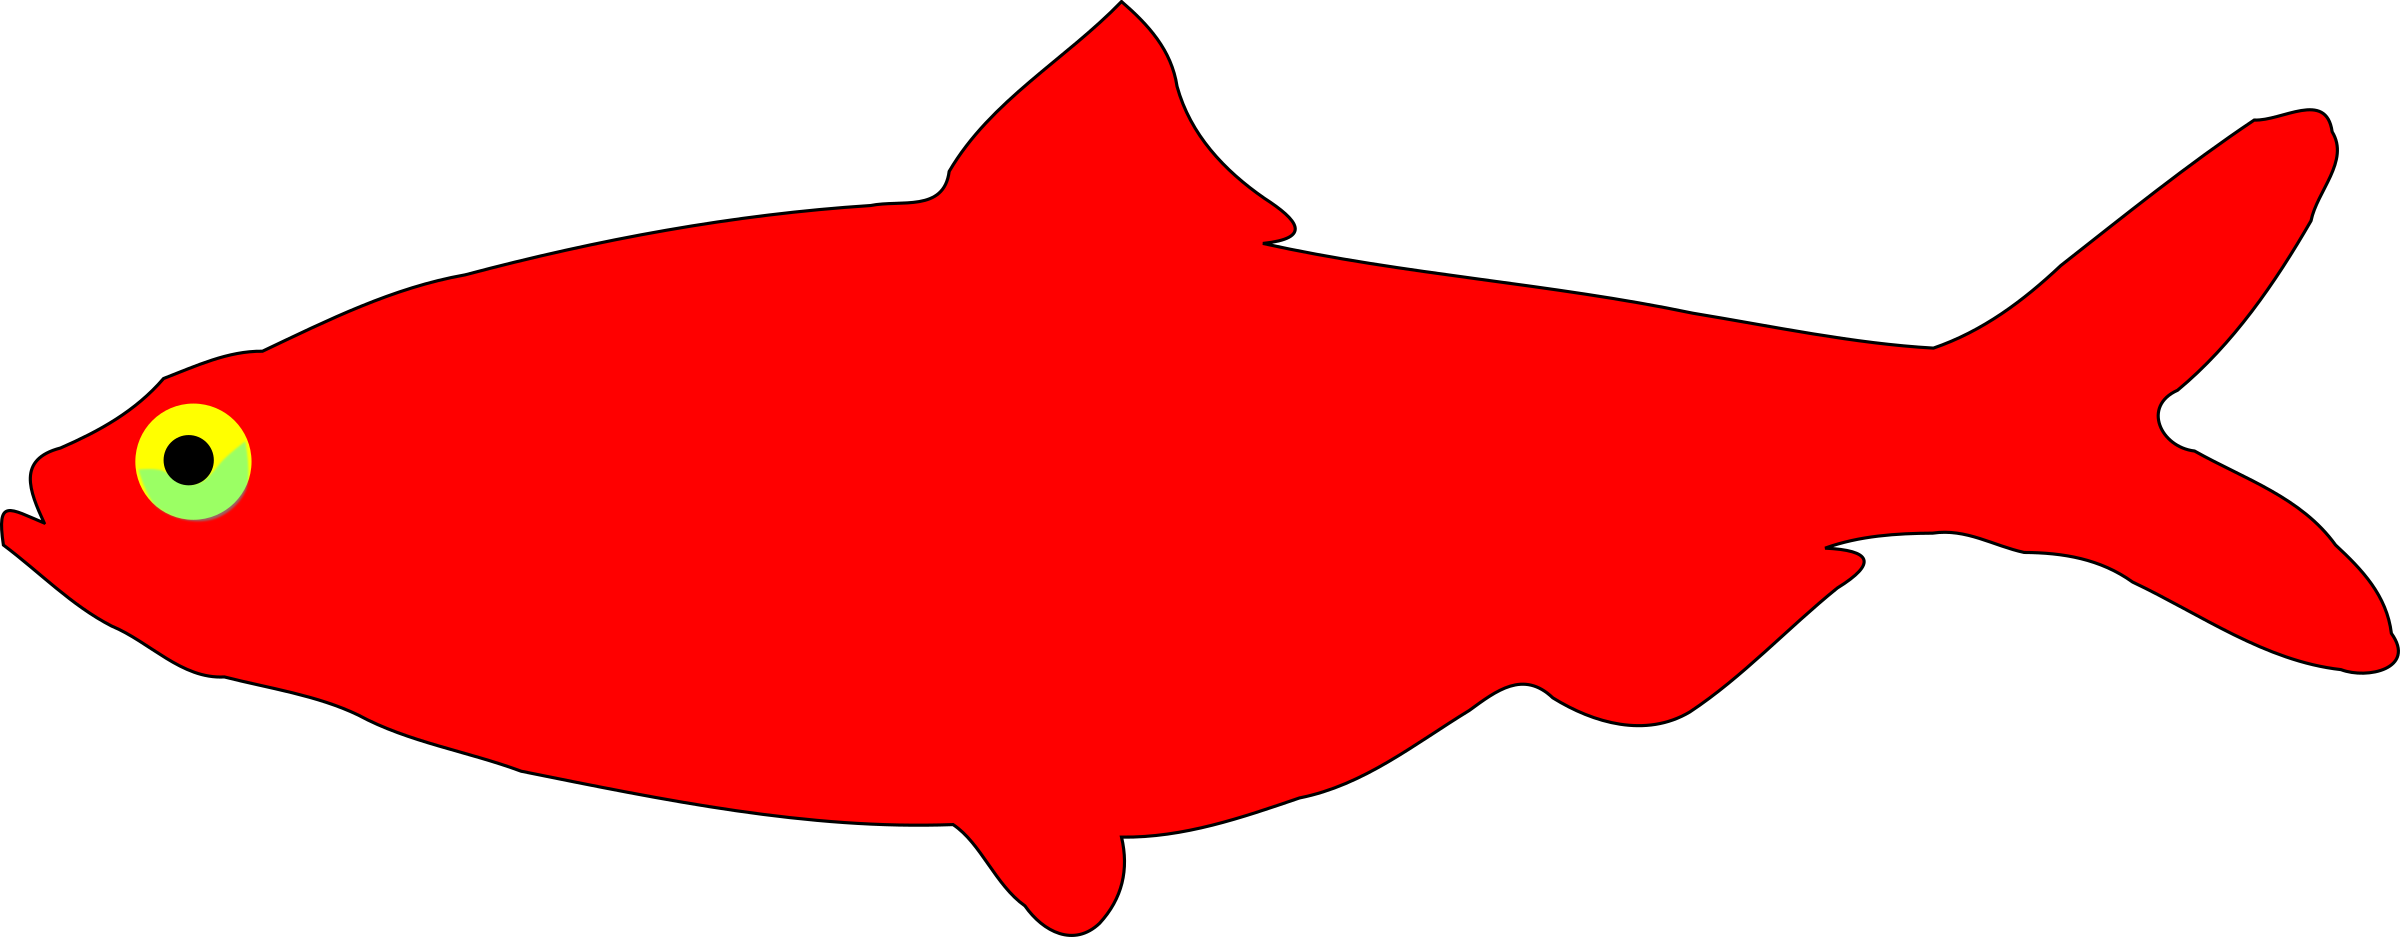 Red flag Clip art - red fish png download - 2400*937 - Free Transparent ...